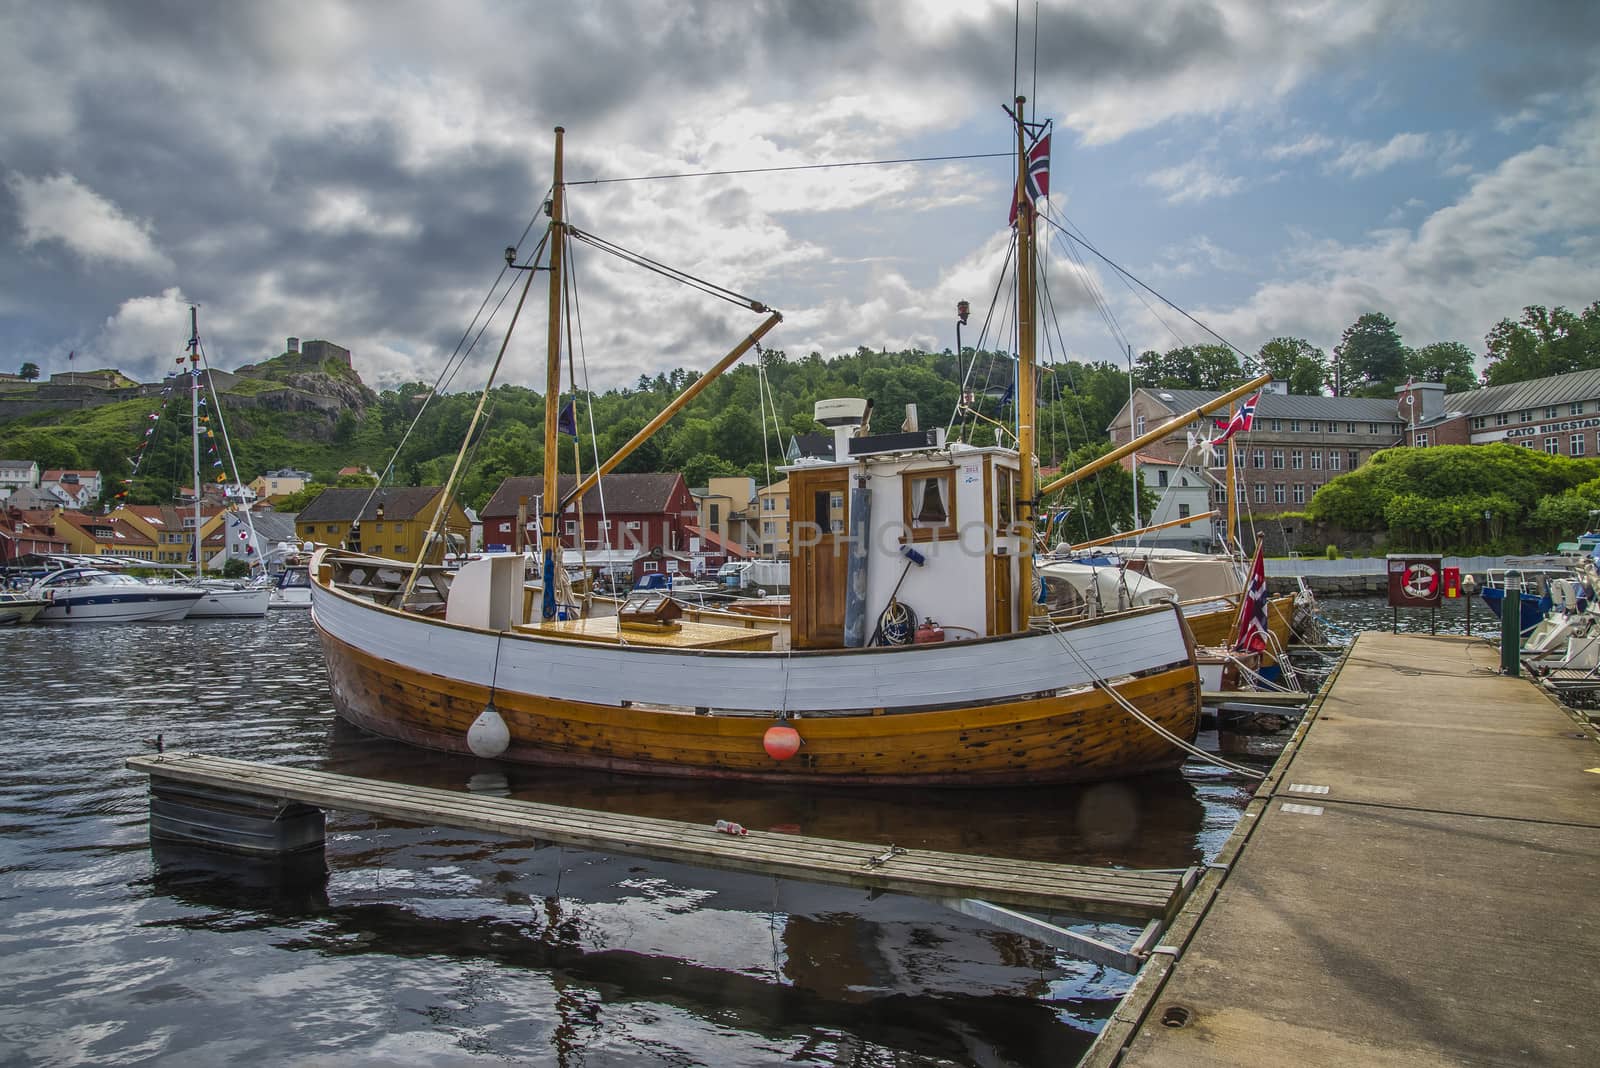 Exhibition of boats in the port of Halden, photo 6 by steirus